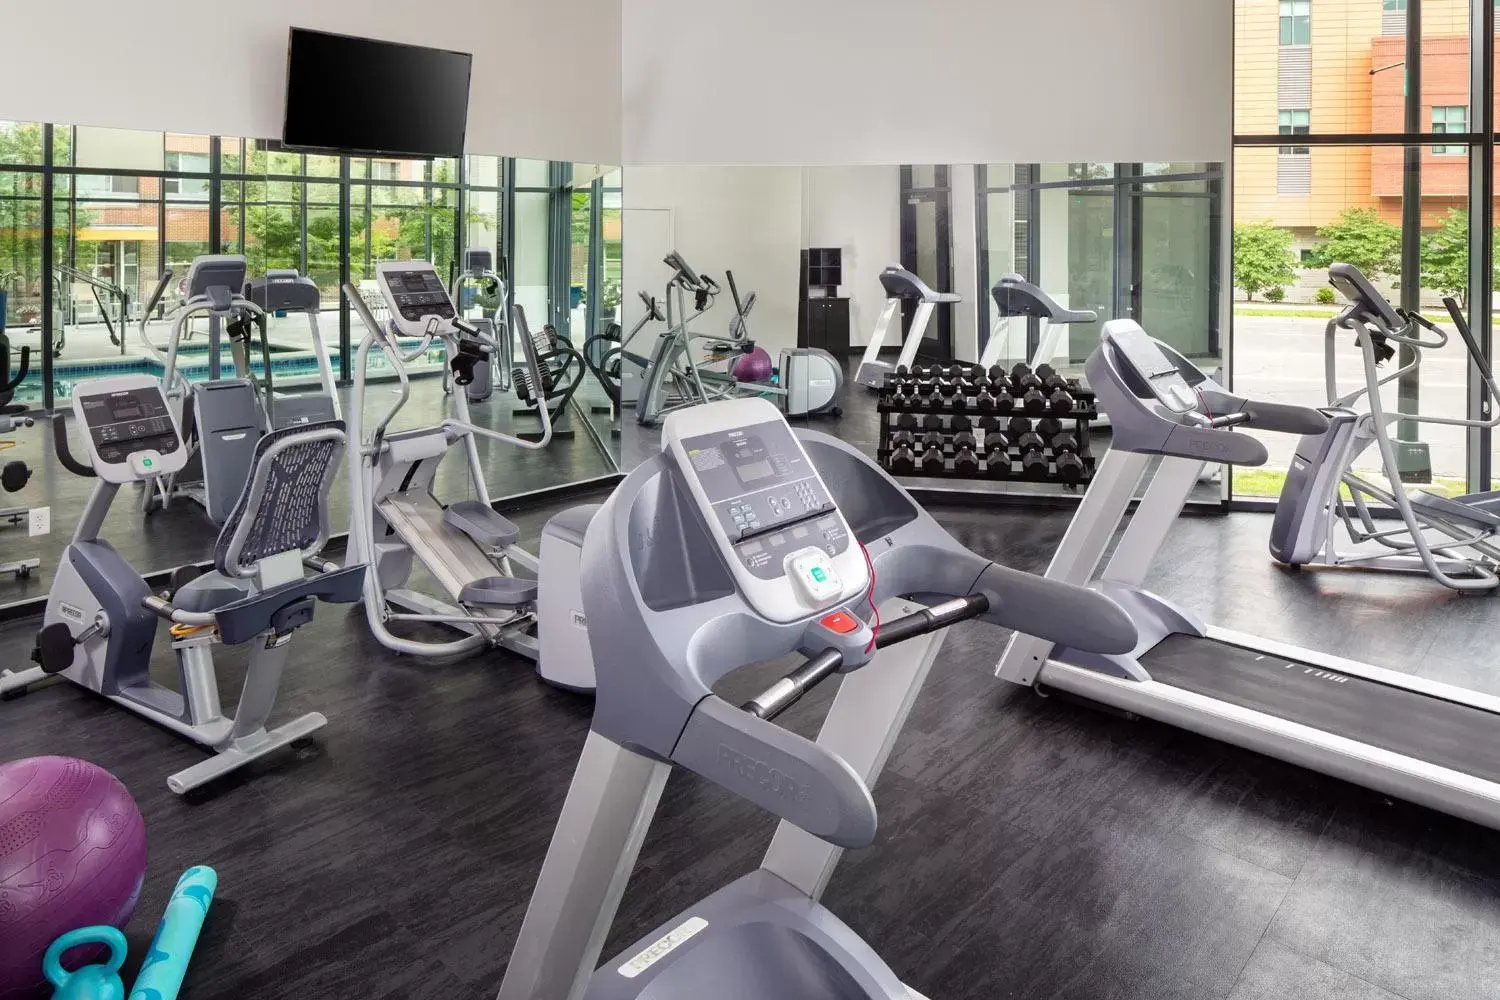 Fitness centre/facilities, Fitness Center/Facilities in Kent State University Hotel and Conference Center